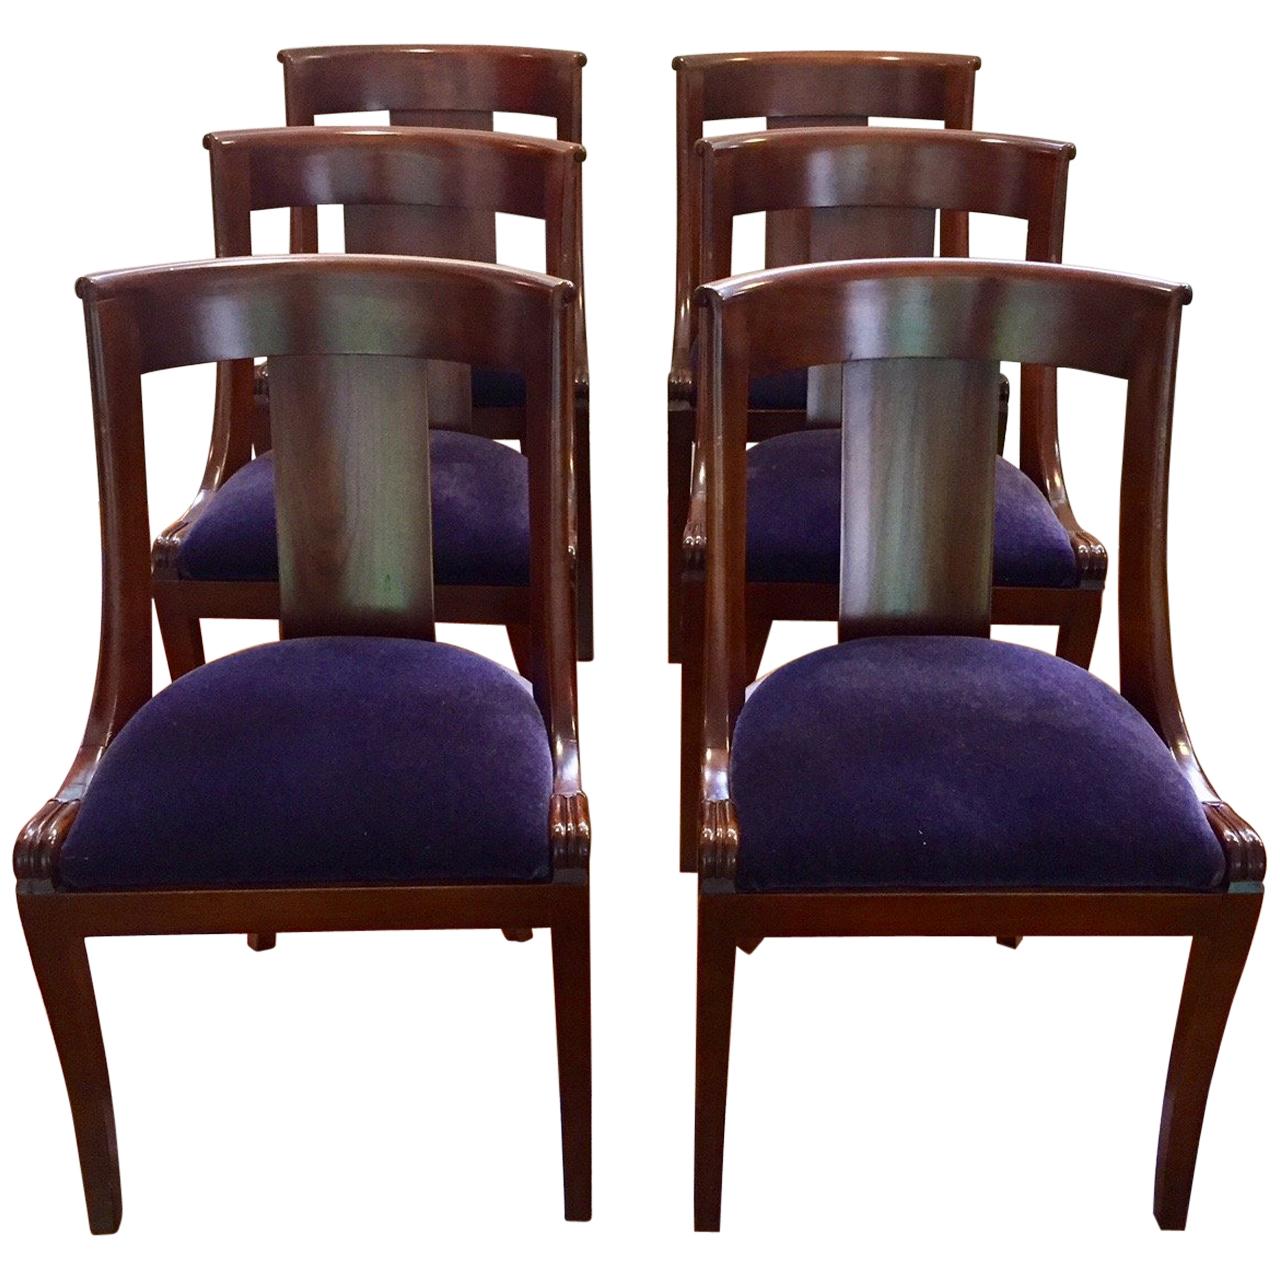 Wonderful Set of Ten Antique English Dining Chairs with Mohair Upholstery